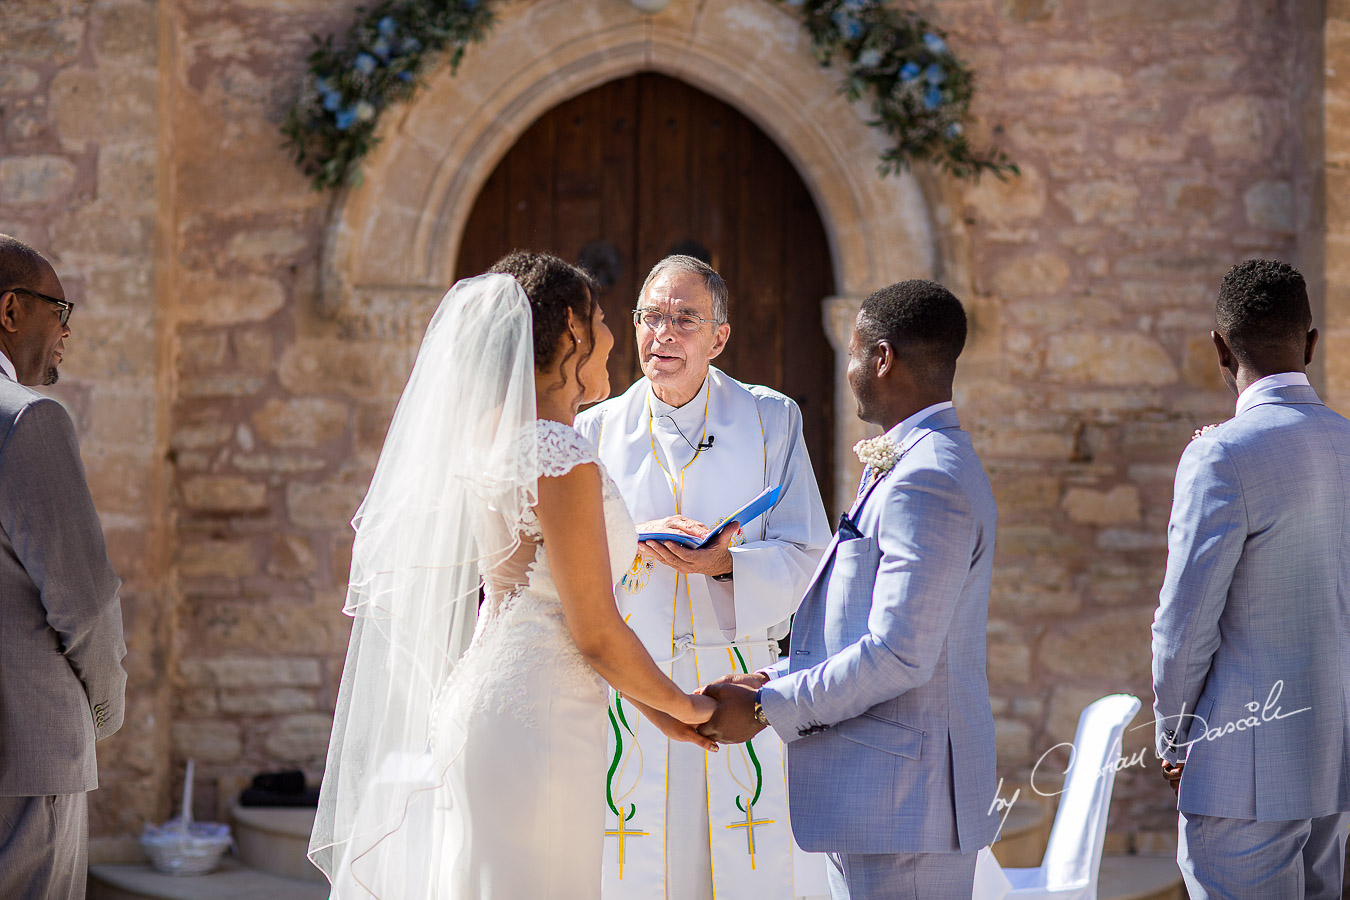 Beautiful ceremony moments captured at a wedding at Minthis Hills in Cyprus, by Cristian Dascalu.